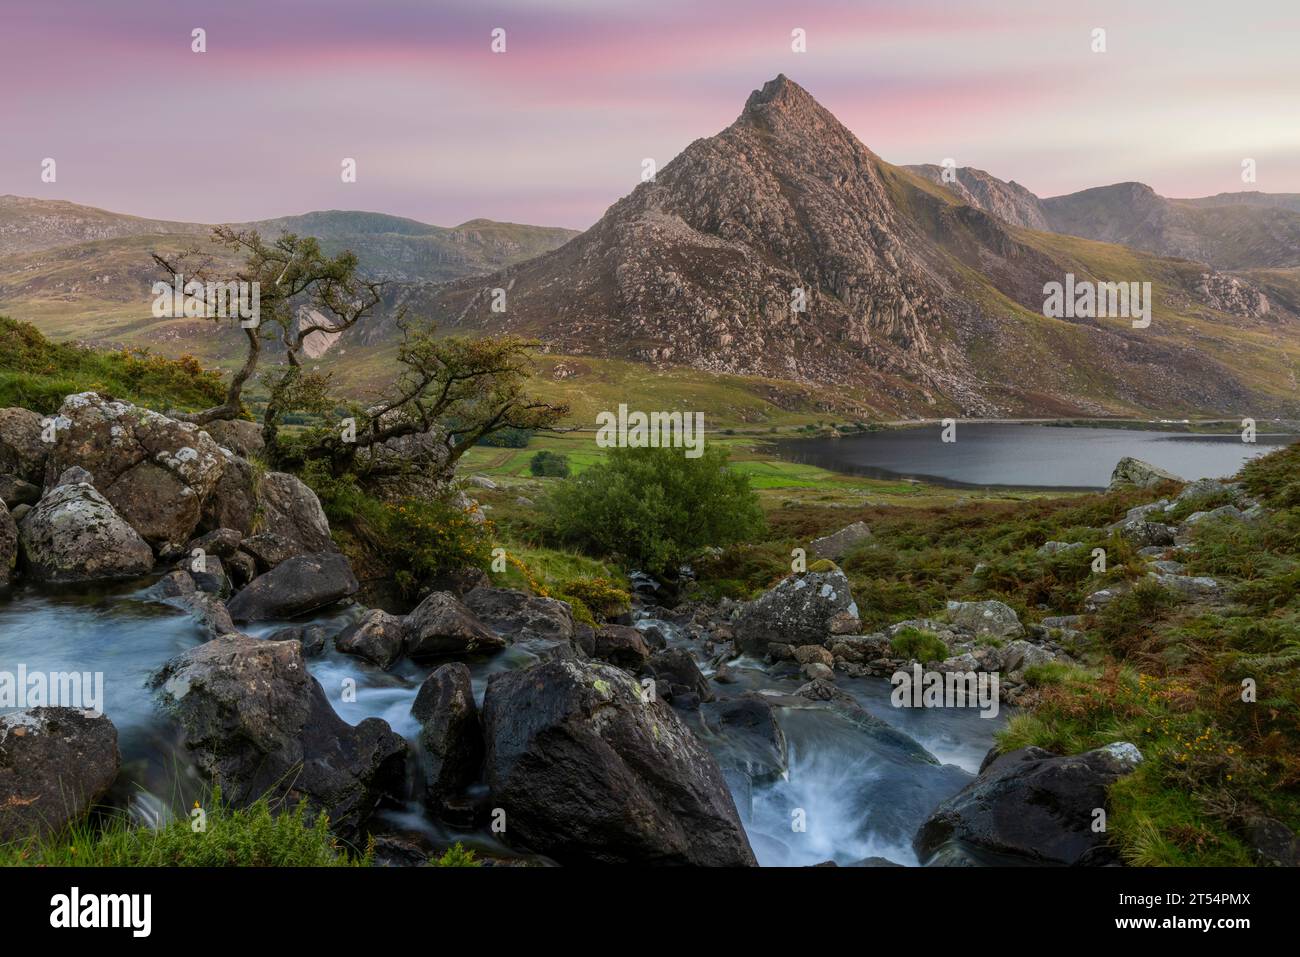 The Afon Lloer is a river in Snowdonia, North Wales, that flows towards the mountain Tryfan. Stock Photo